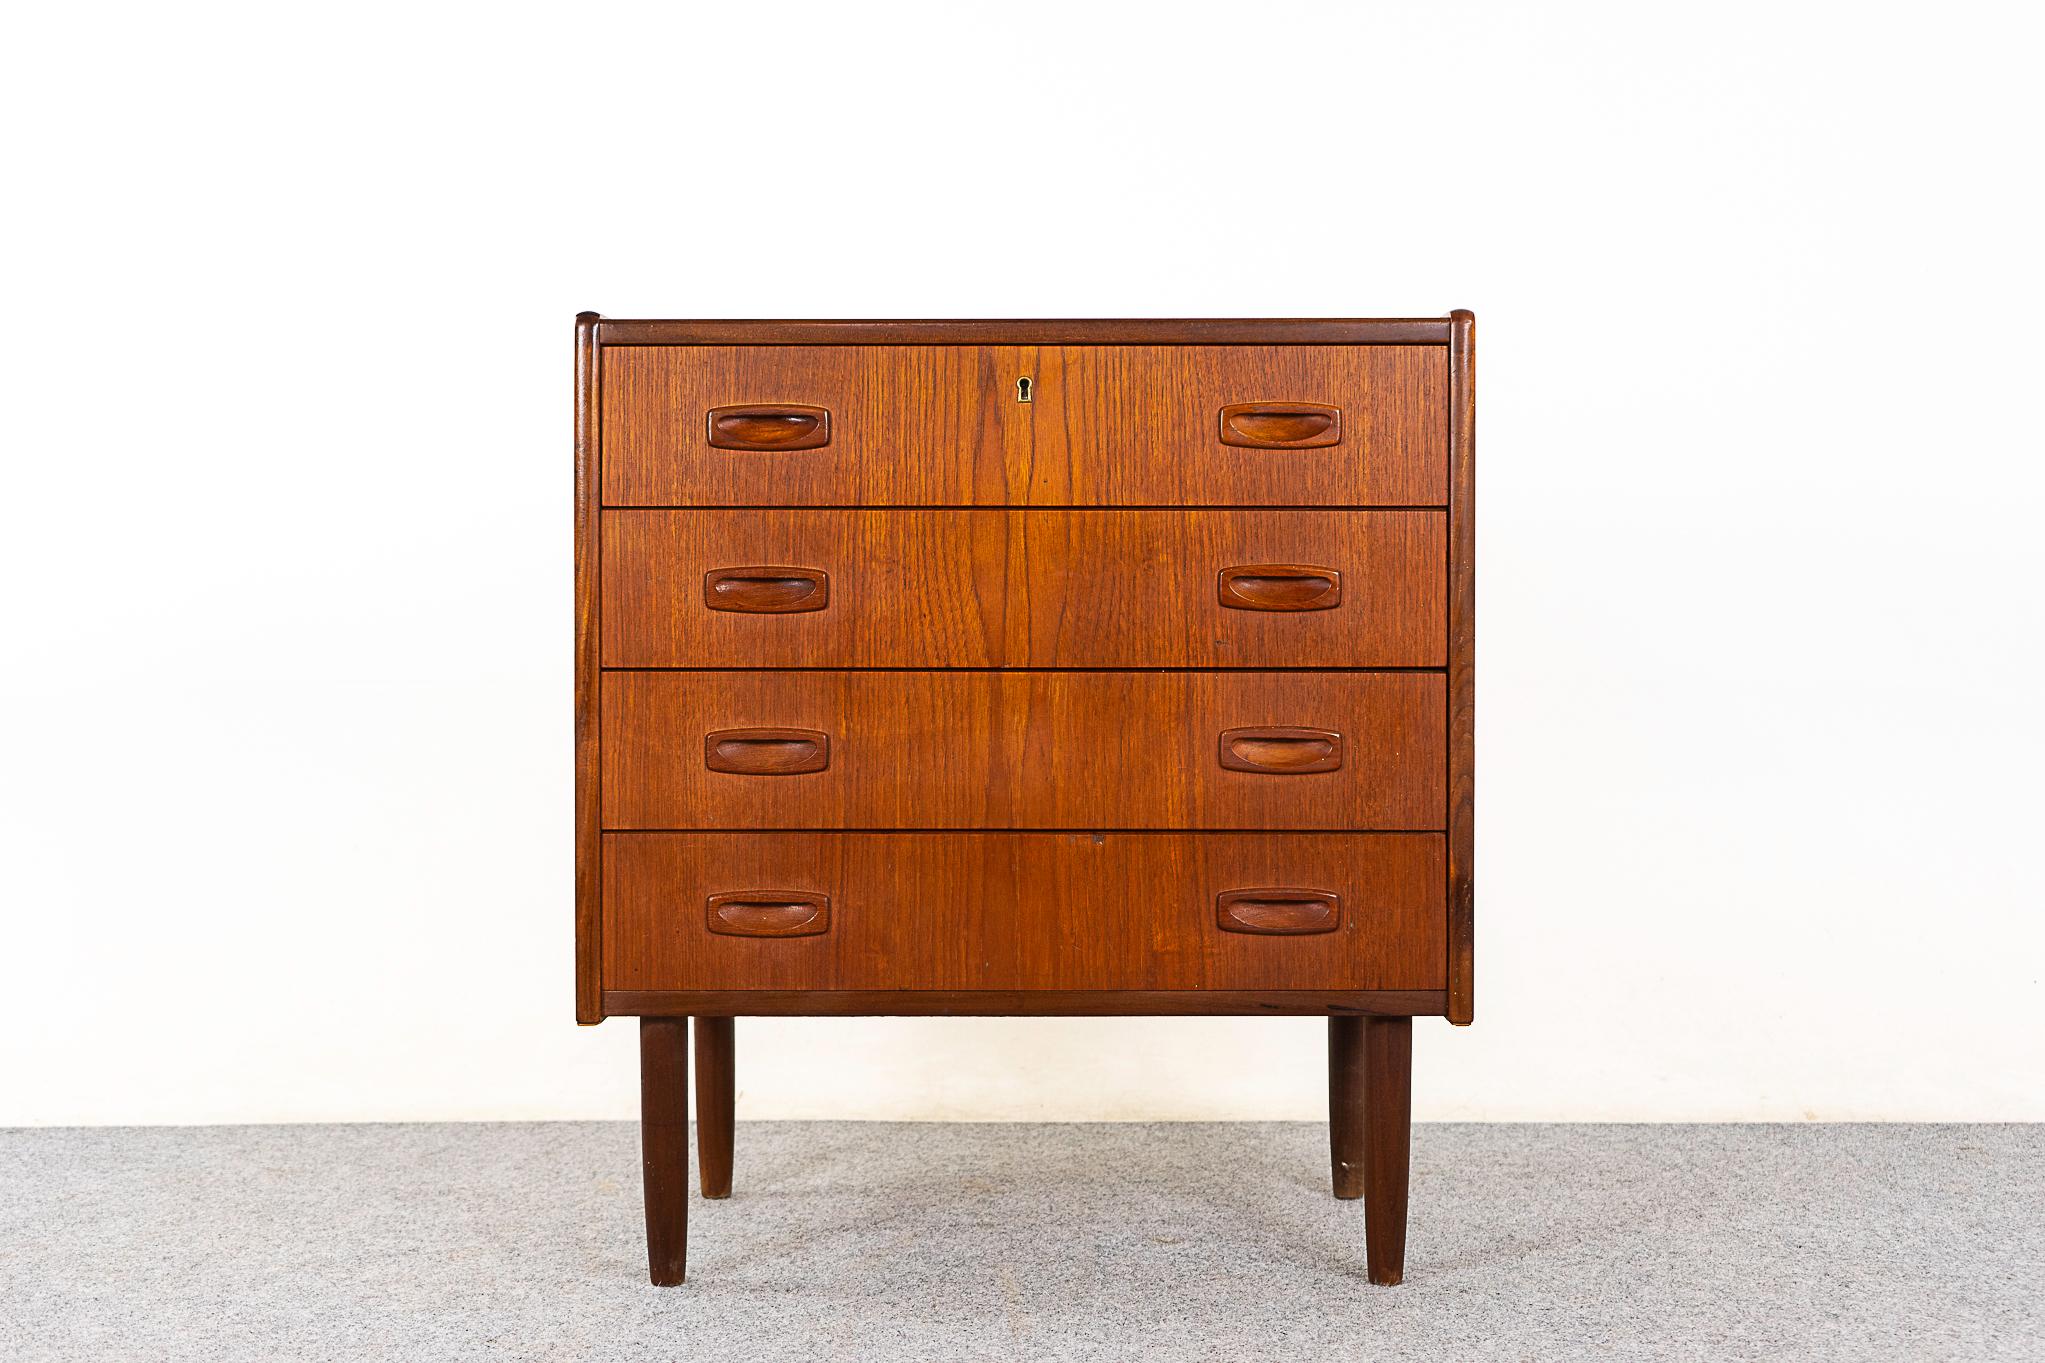 Teak Danish dresser, circa 1960's. Stunning book-matched veneer drawer faces. Sleek handles, dovetail construction and tapering legs.  

Please inquire for remote and international shipping.